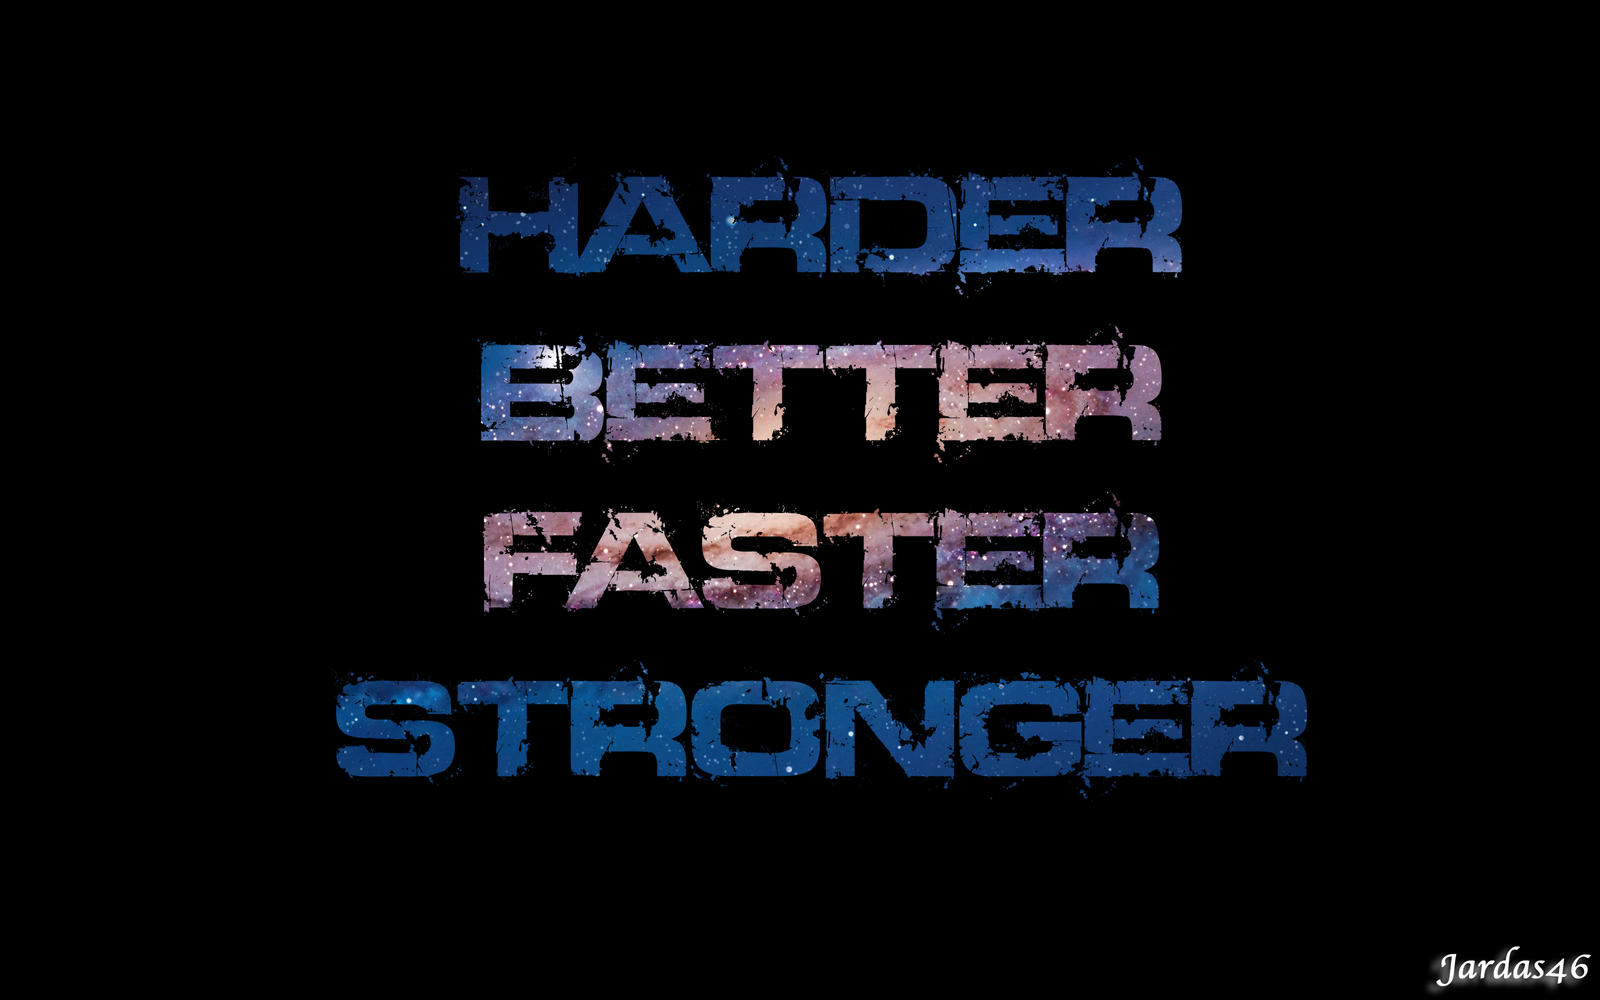 Faster and harder текст. Faster stronger песня ремикс. Better faster. Harder, better, faster, stronger Daft Punk. Хардер беттер Фастер стронгер.